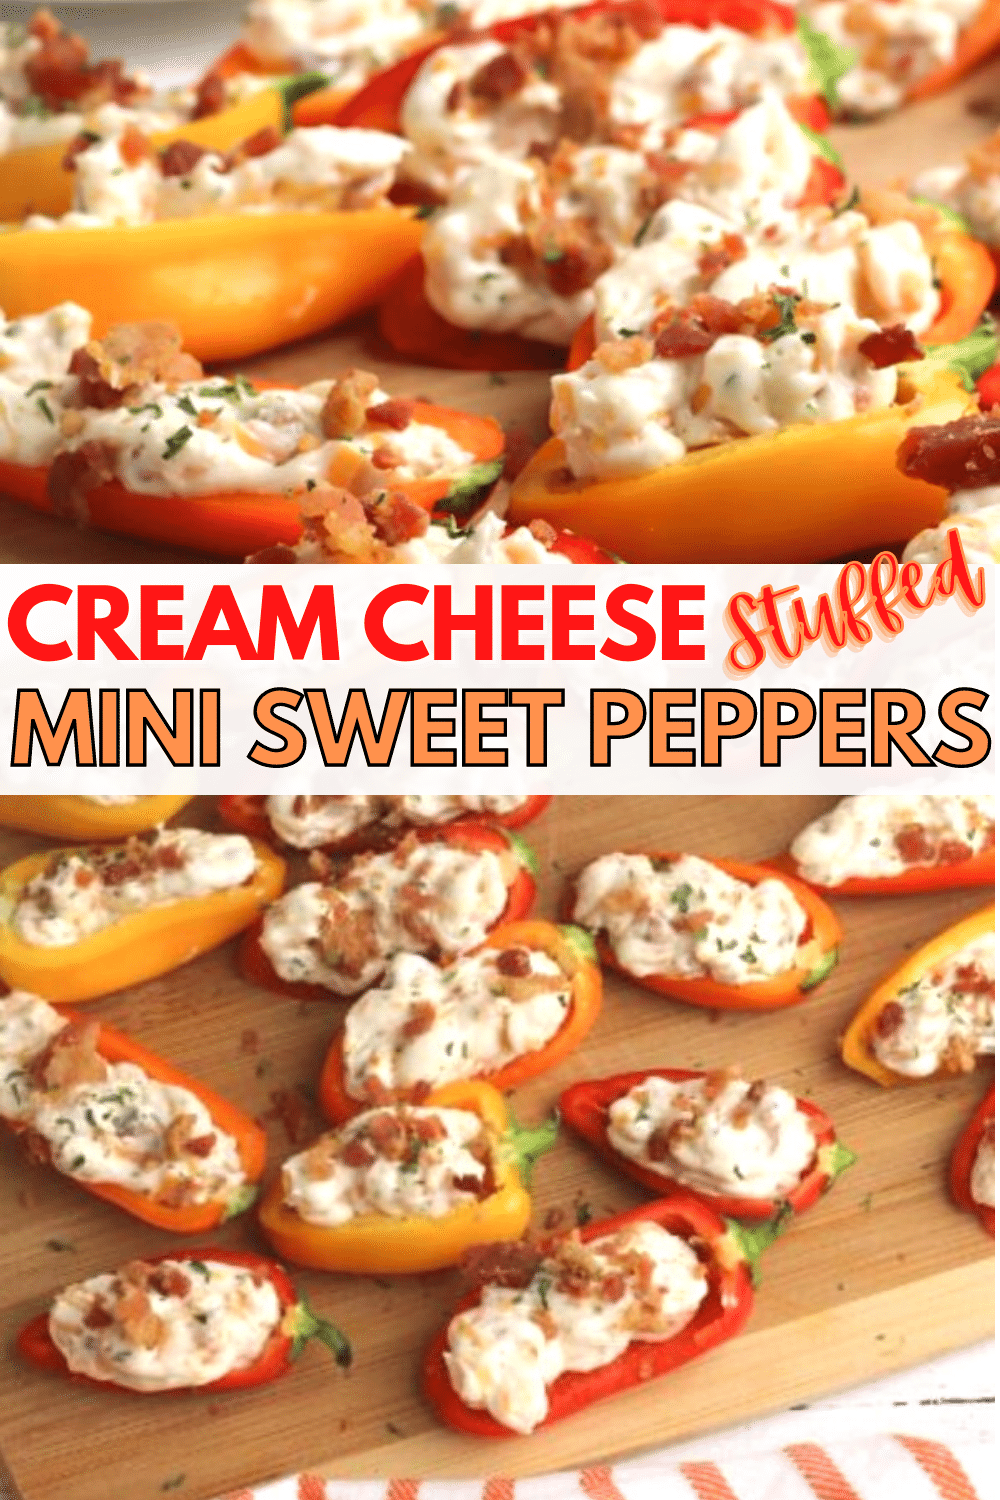 Cream Cheese Stuffed Mini Sweet Peppers are an easy appetizer with only 5 ingredients. No-bake finger food that is delicious and simple to make. #peppers #appetizers #creamcheese via @wondermomwannab